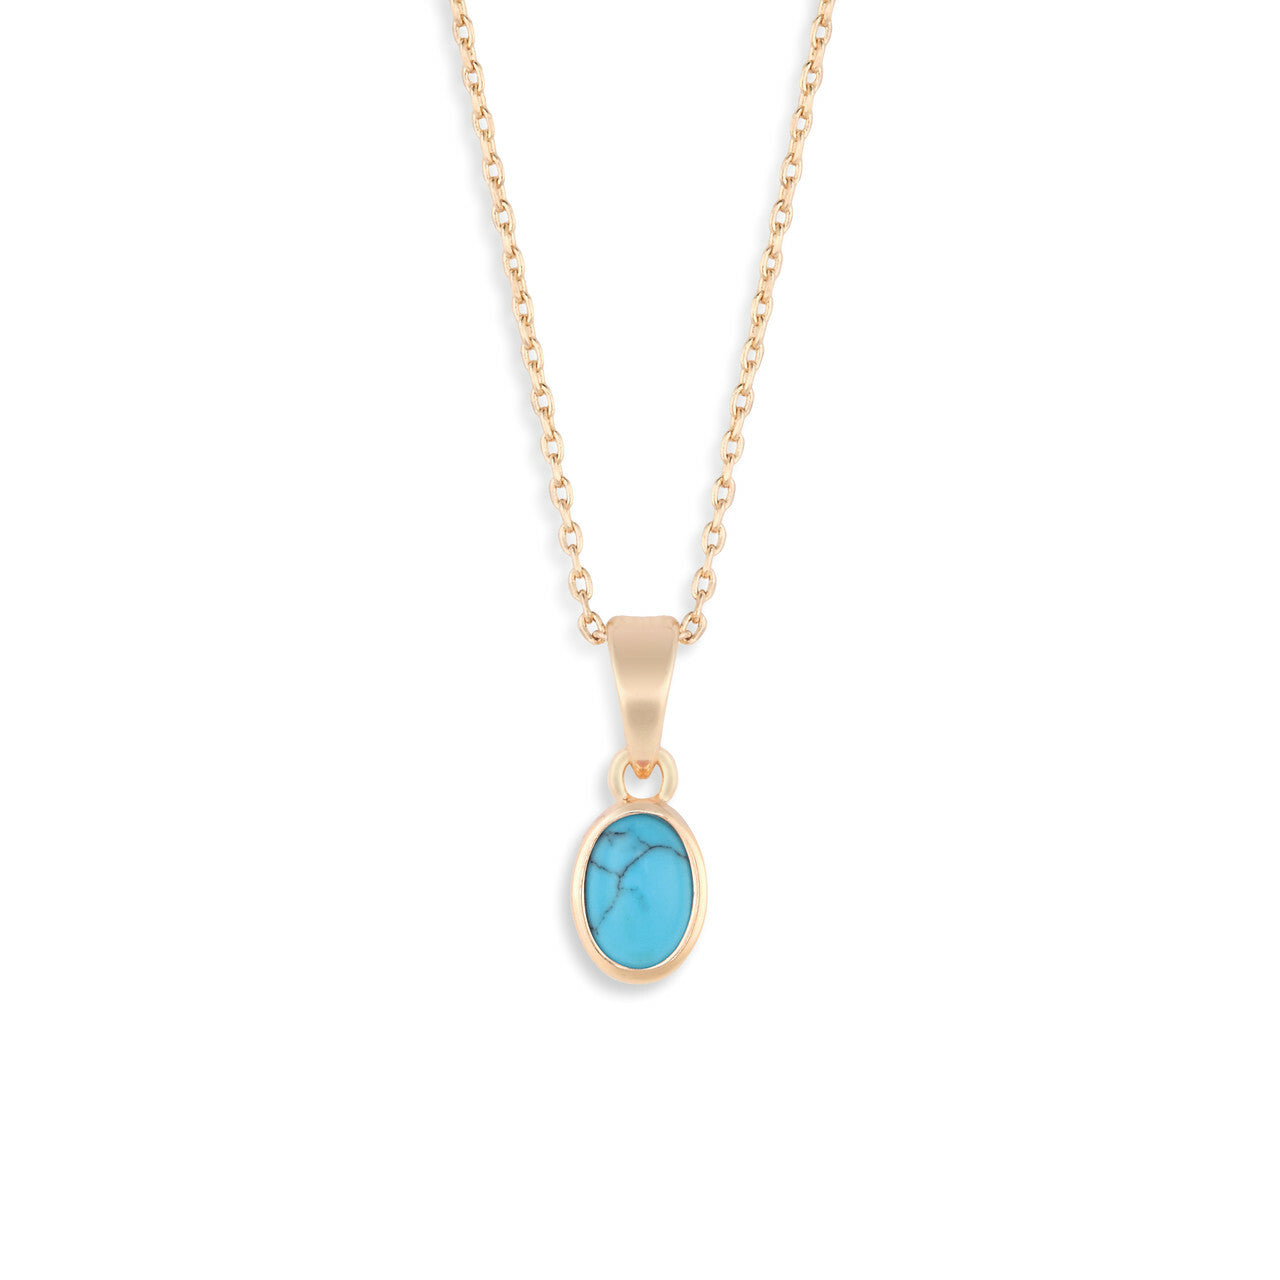 Gold Giving Necklace - Turquoise